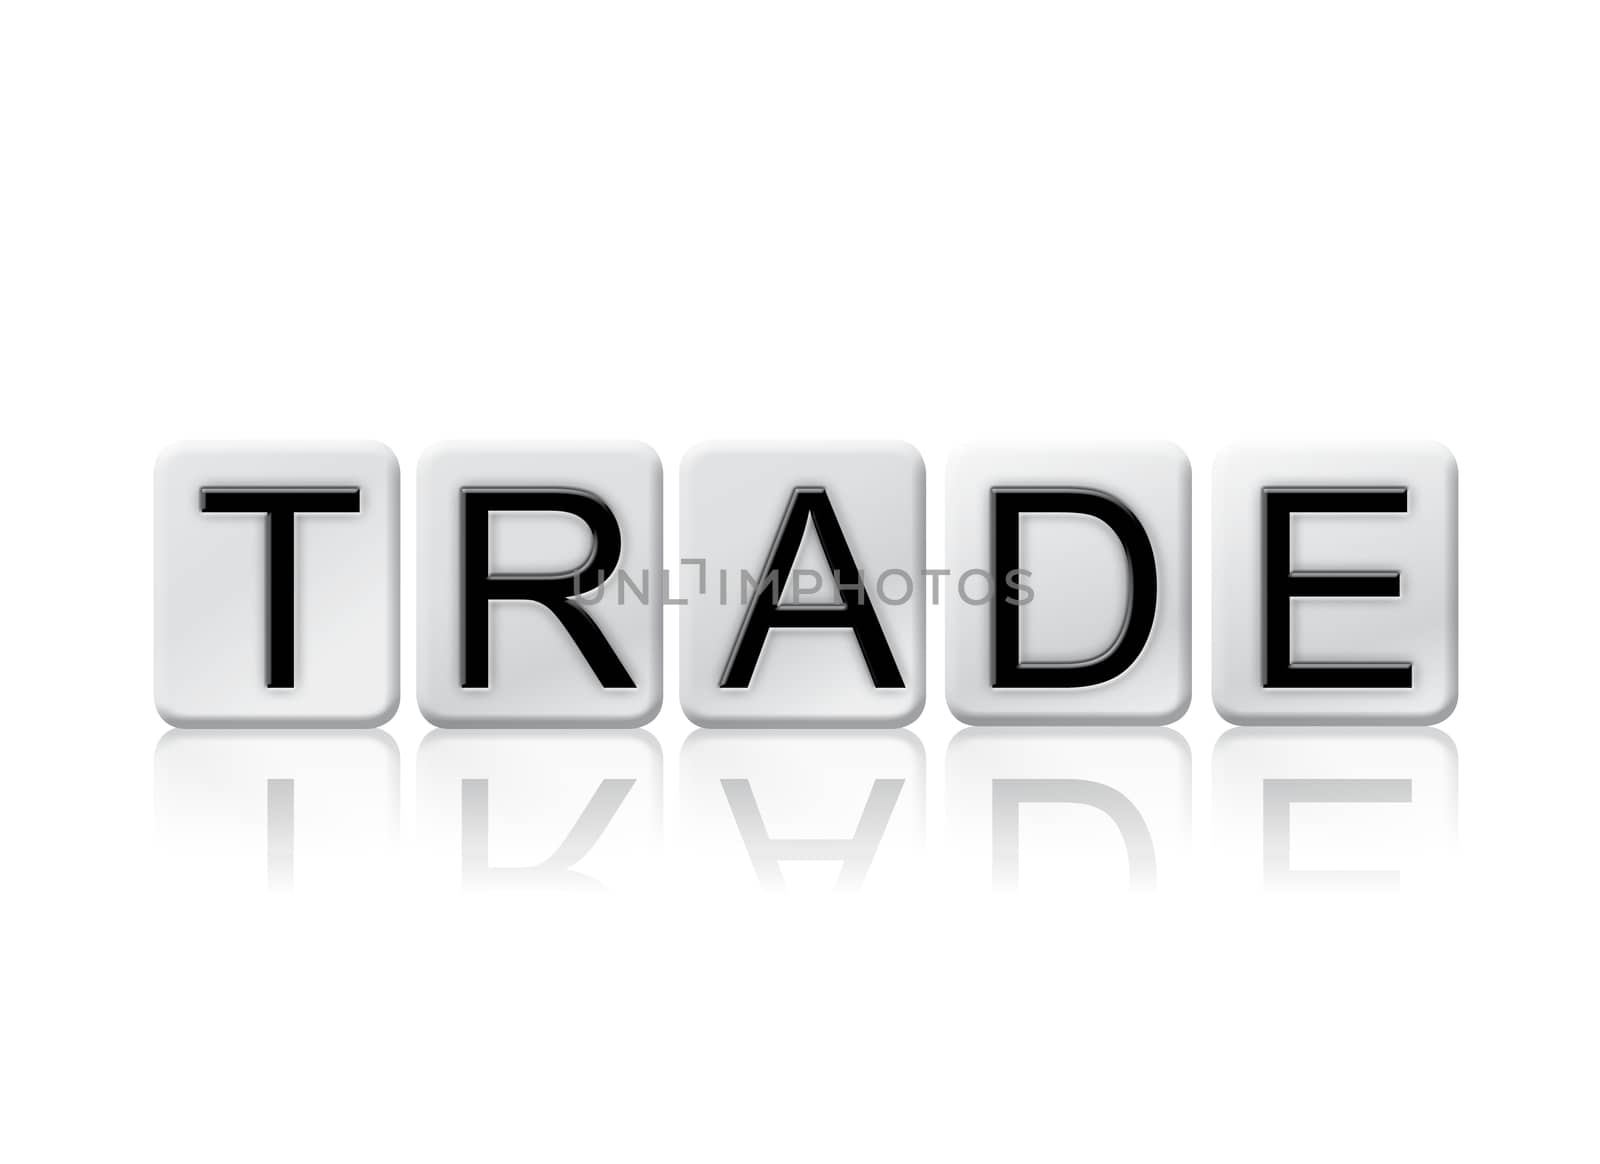 The word "Trade" written in tile letters isolated on a white background.